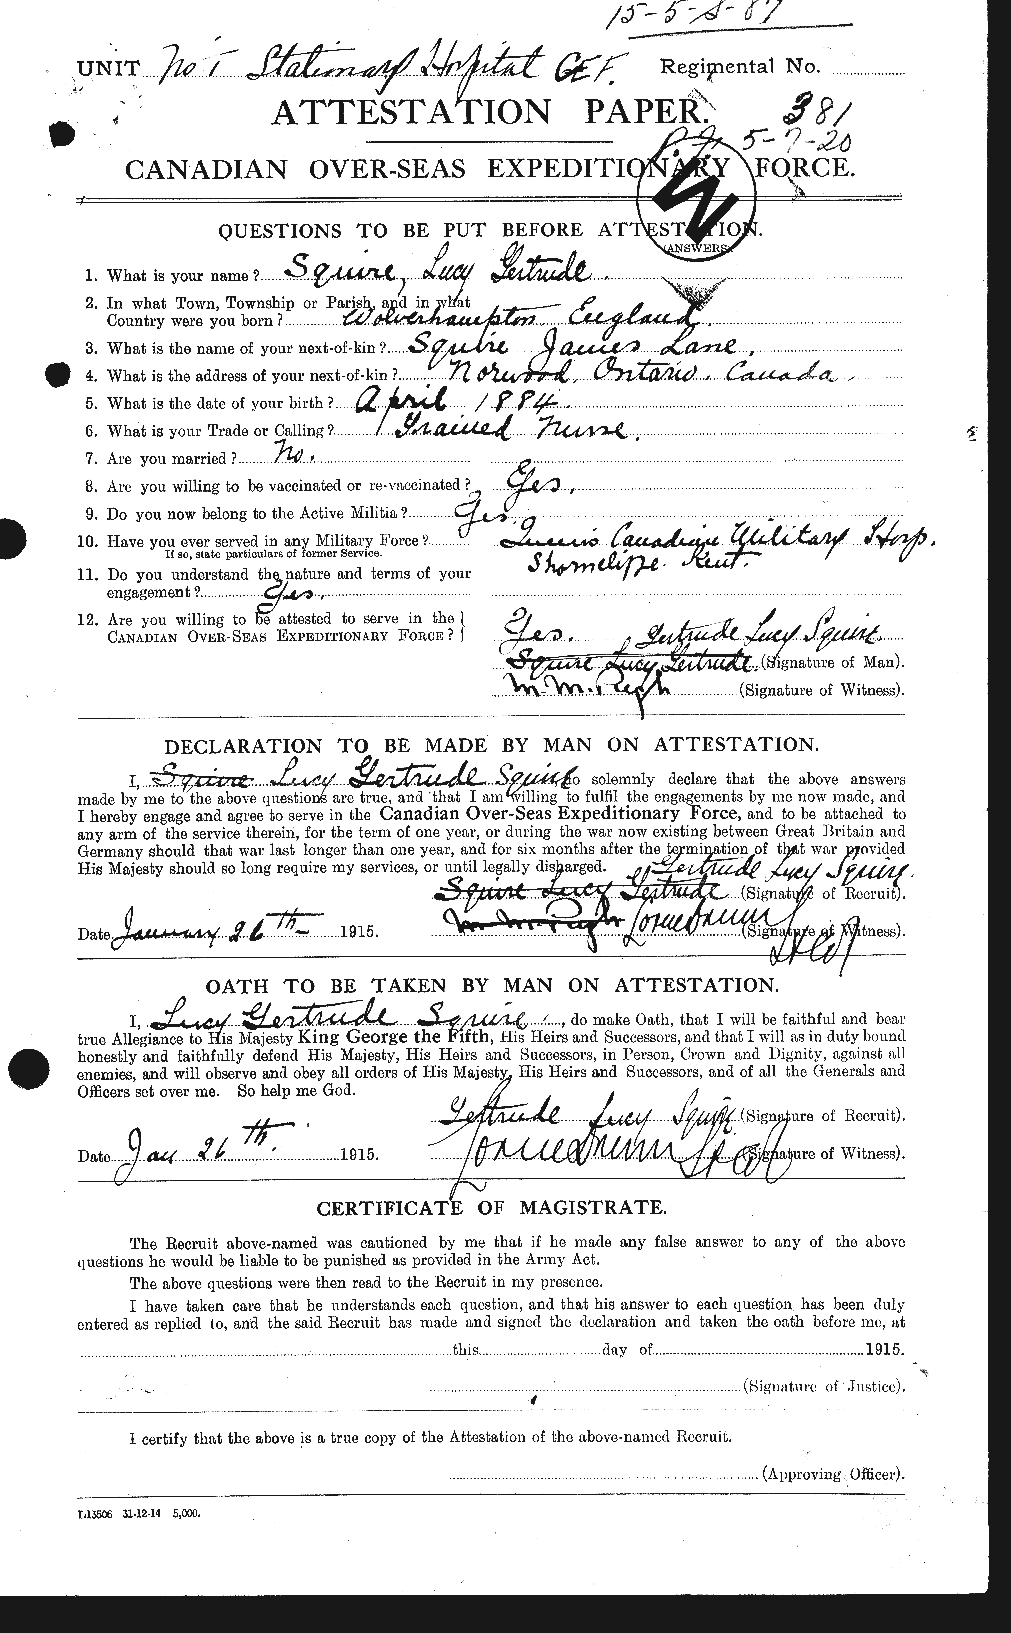 Personnel Records of the First World War - CEF 114761a